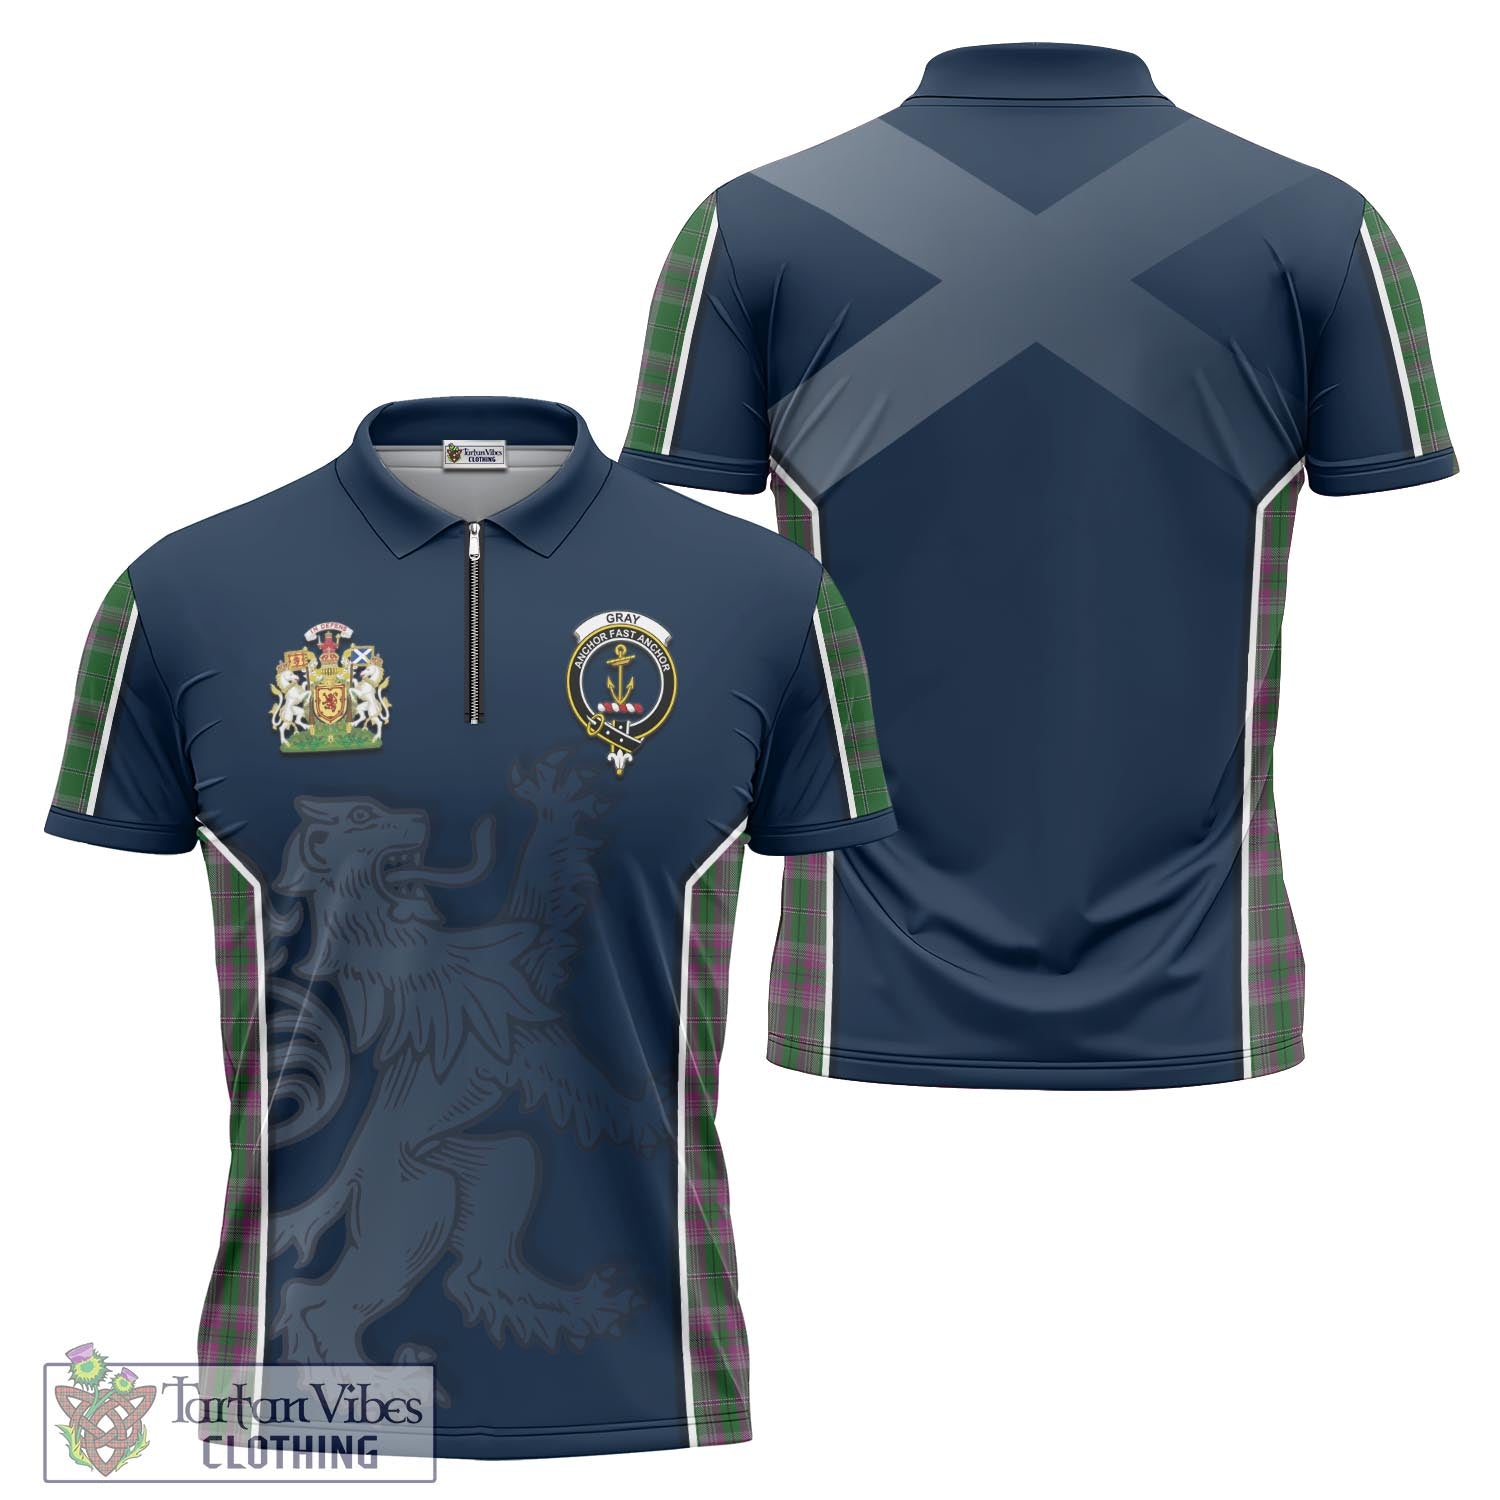 Tartan Vibes Clothing Gray Hunting Tartan Zipper Polo Shirt with Family Crest and Lion Rampant Vibes Sport Style